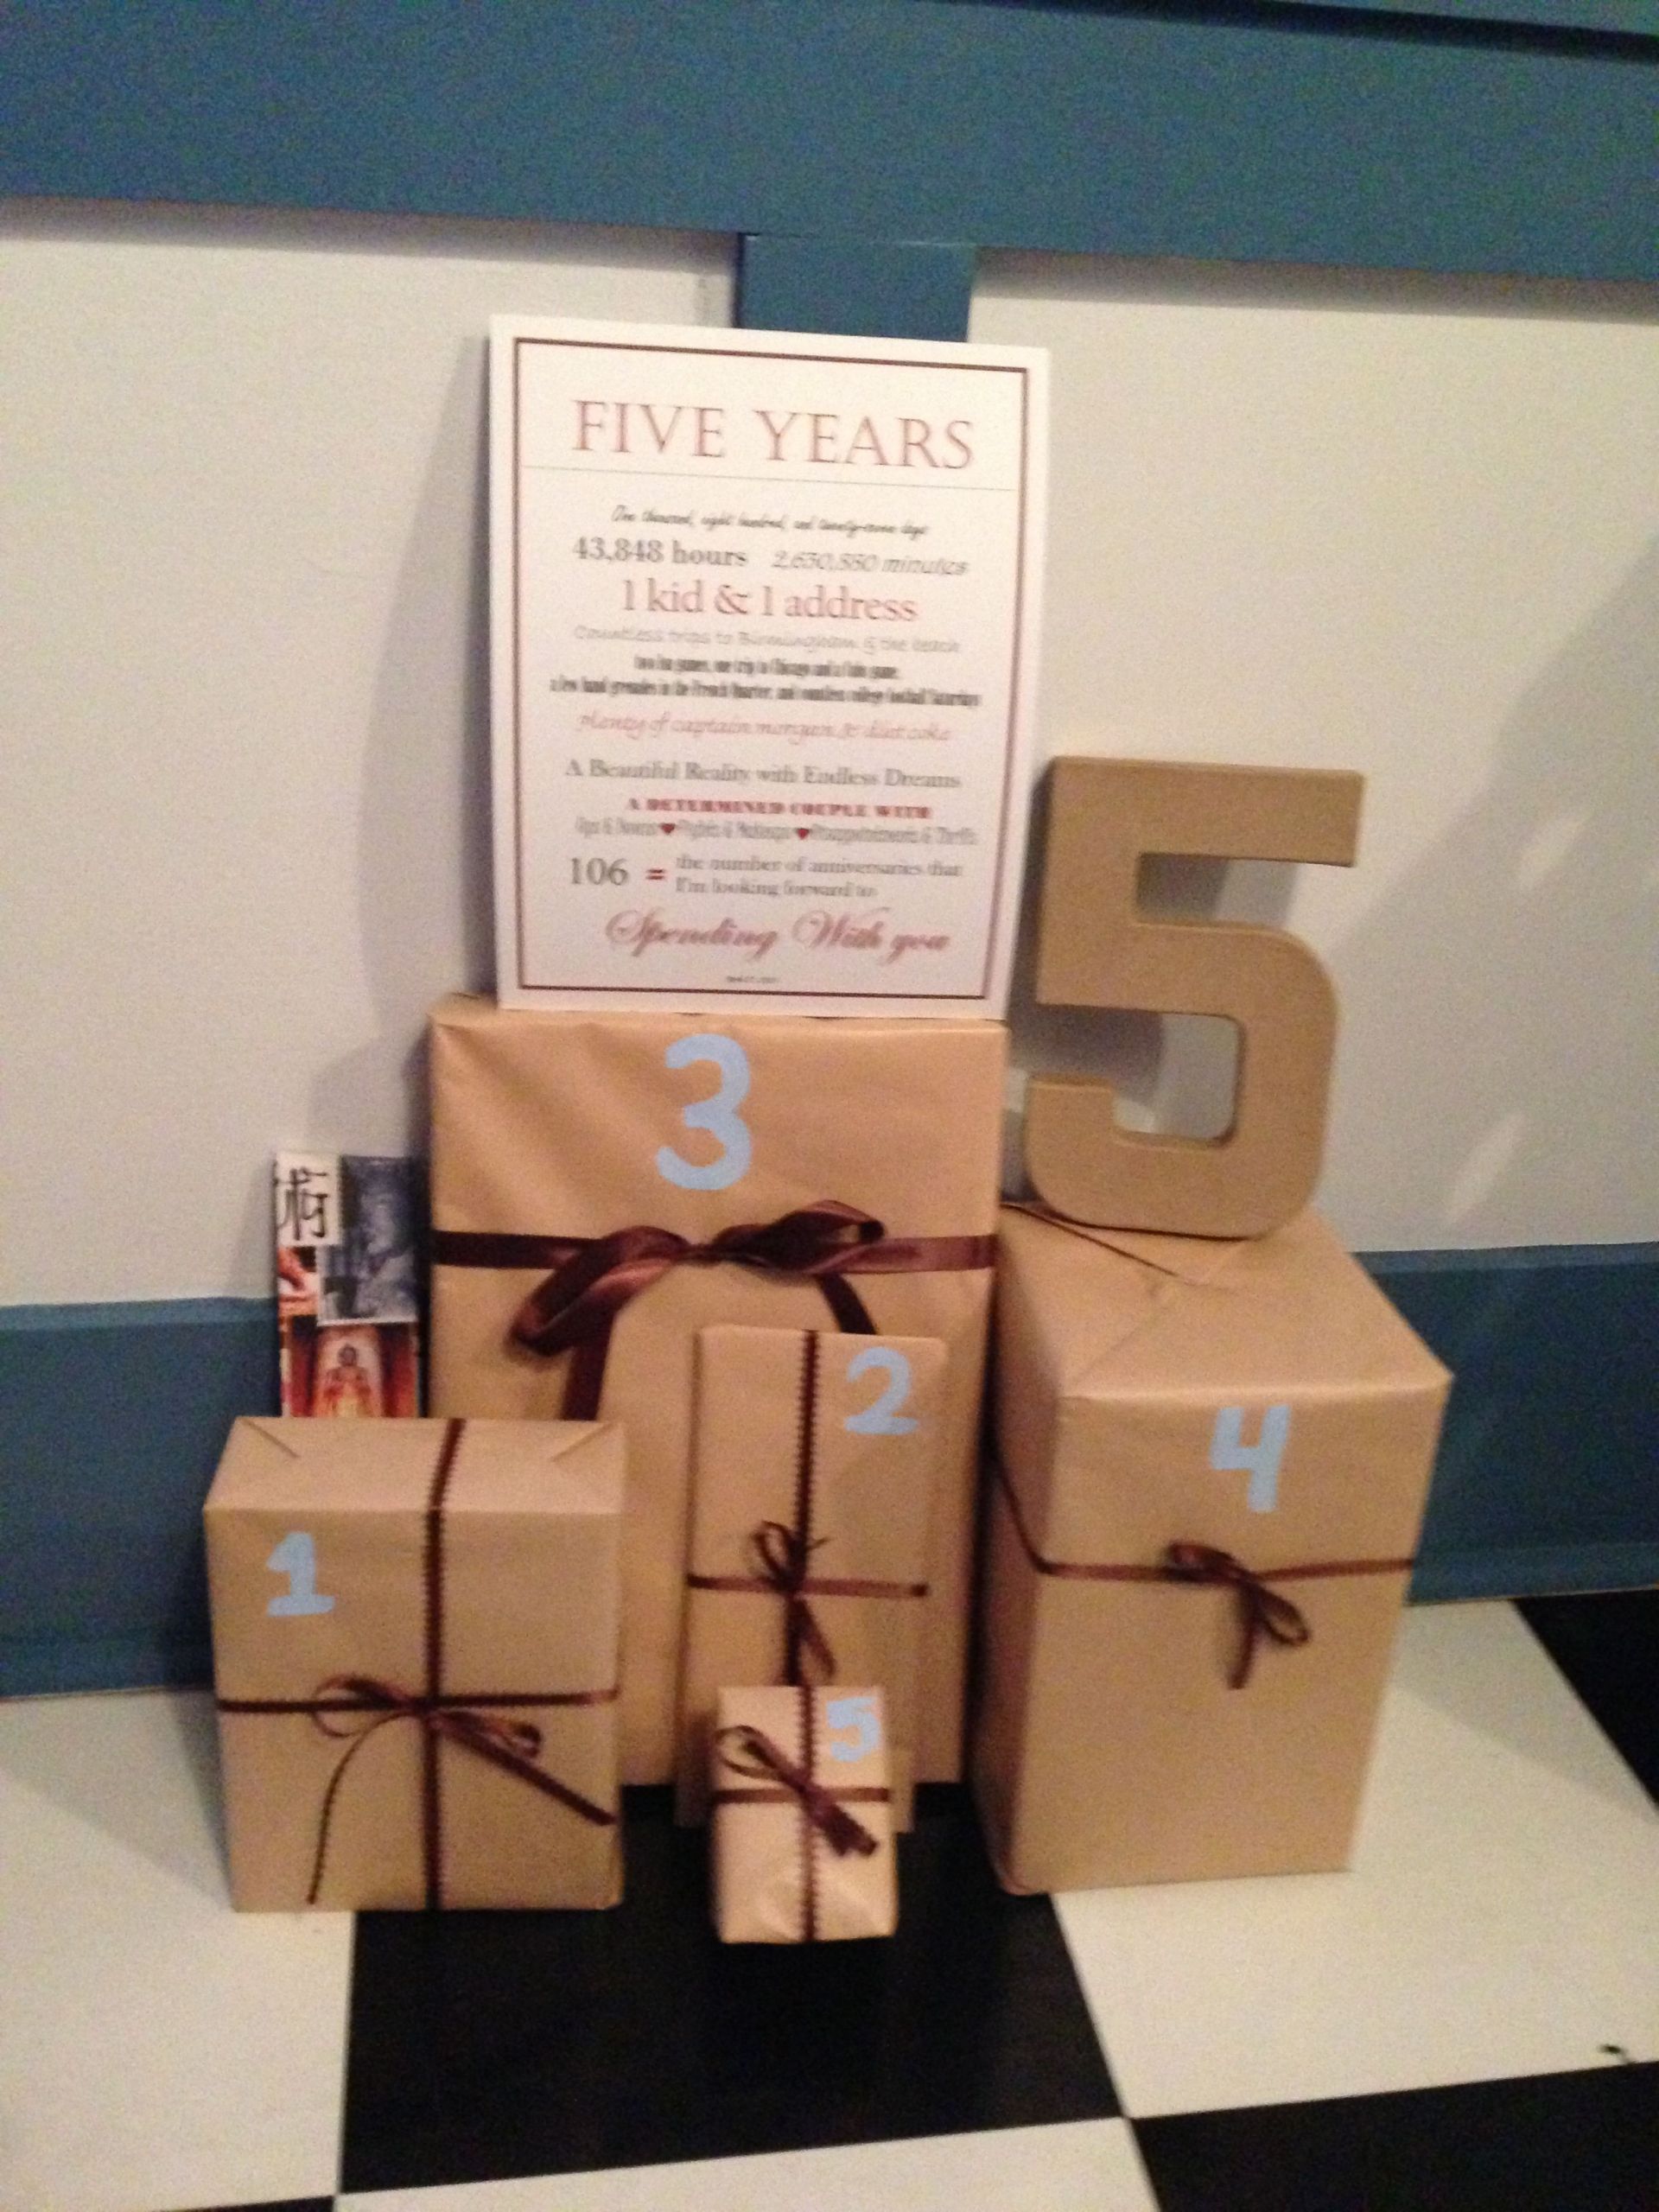 Gift Ideas For 5 Year Anniversary
 5 year anniversary 1 t that reminds you of each year